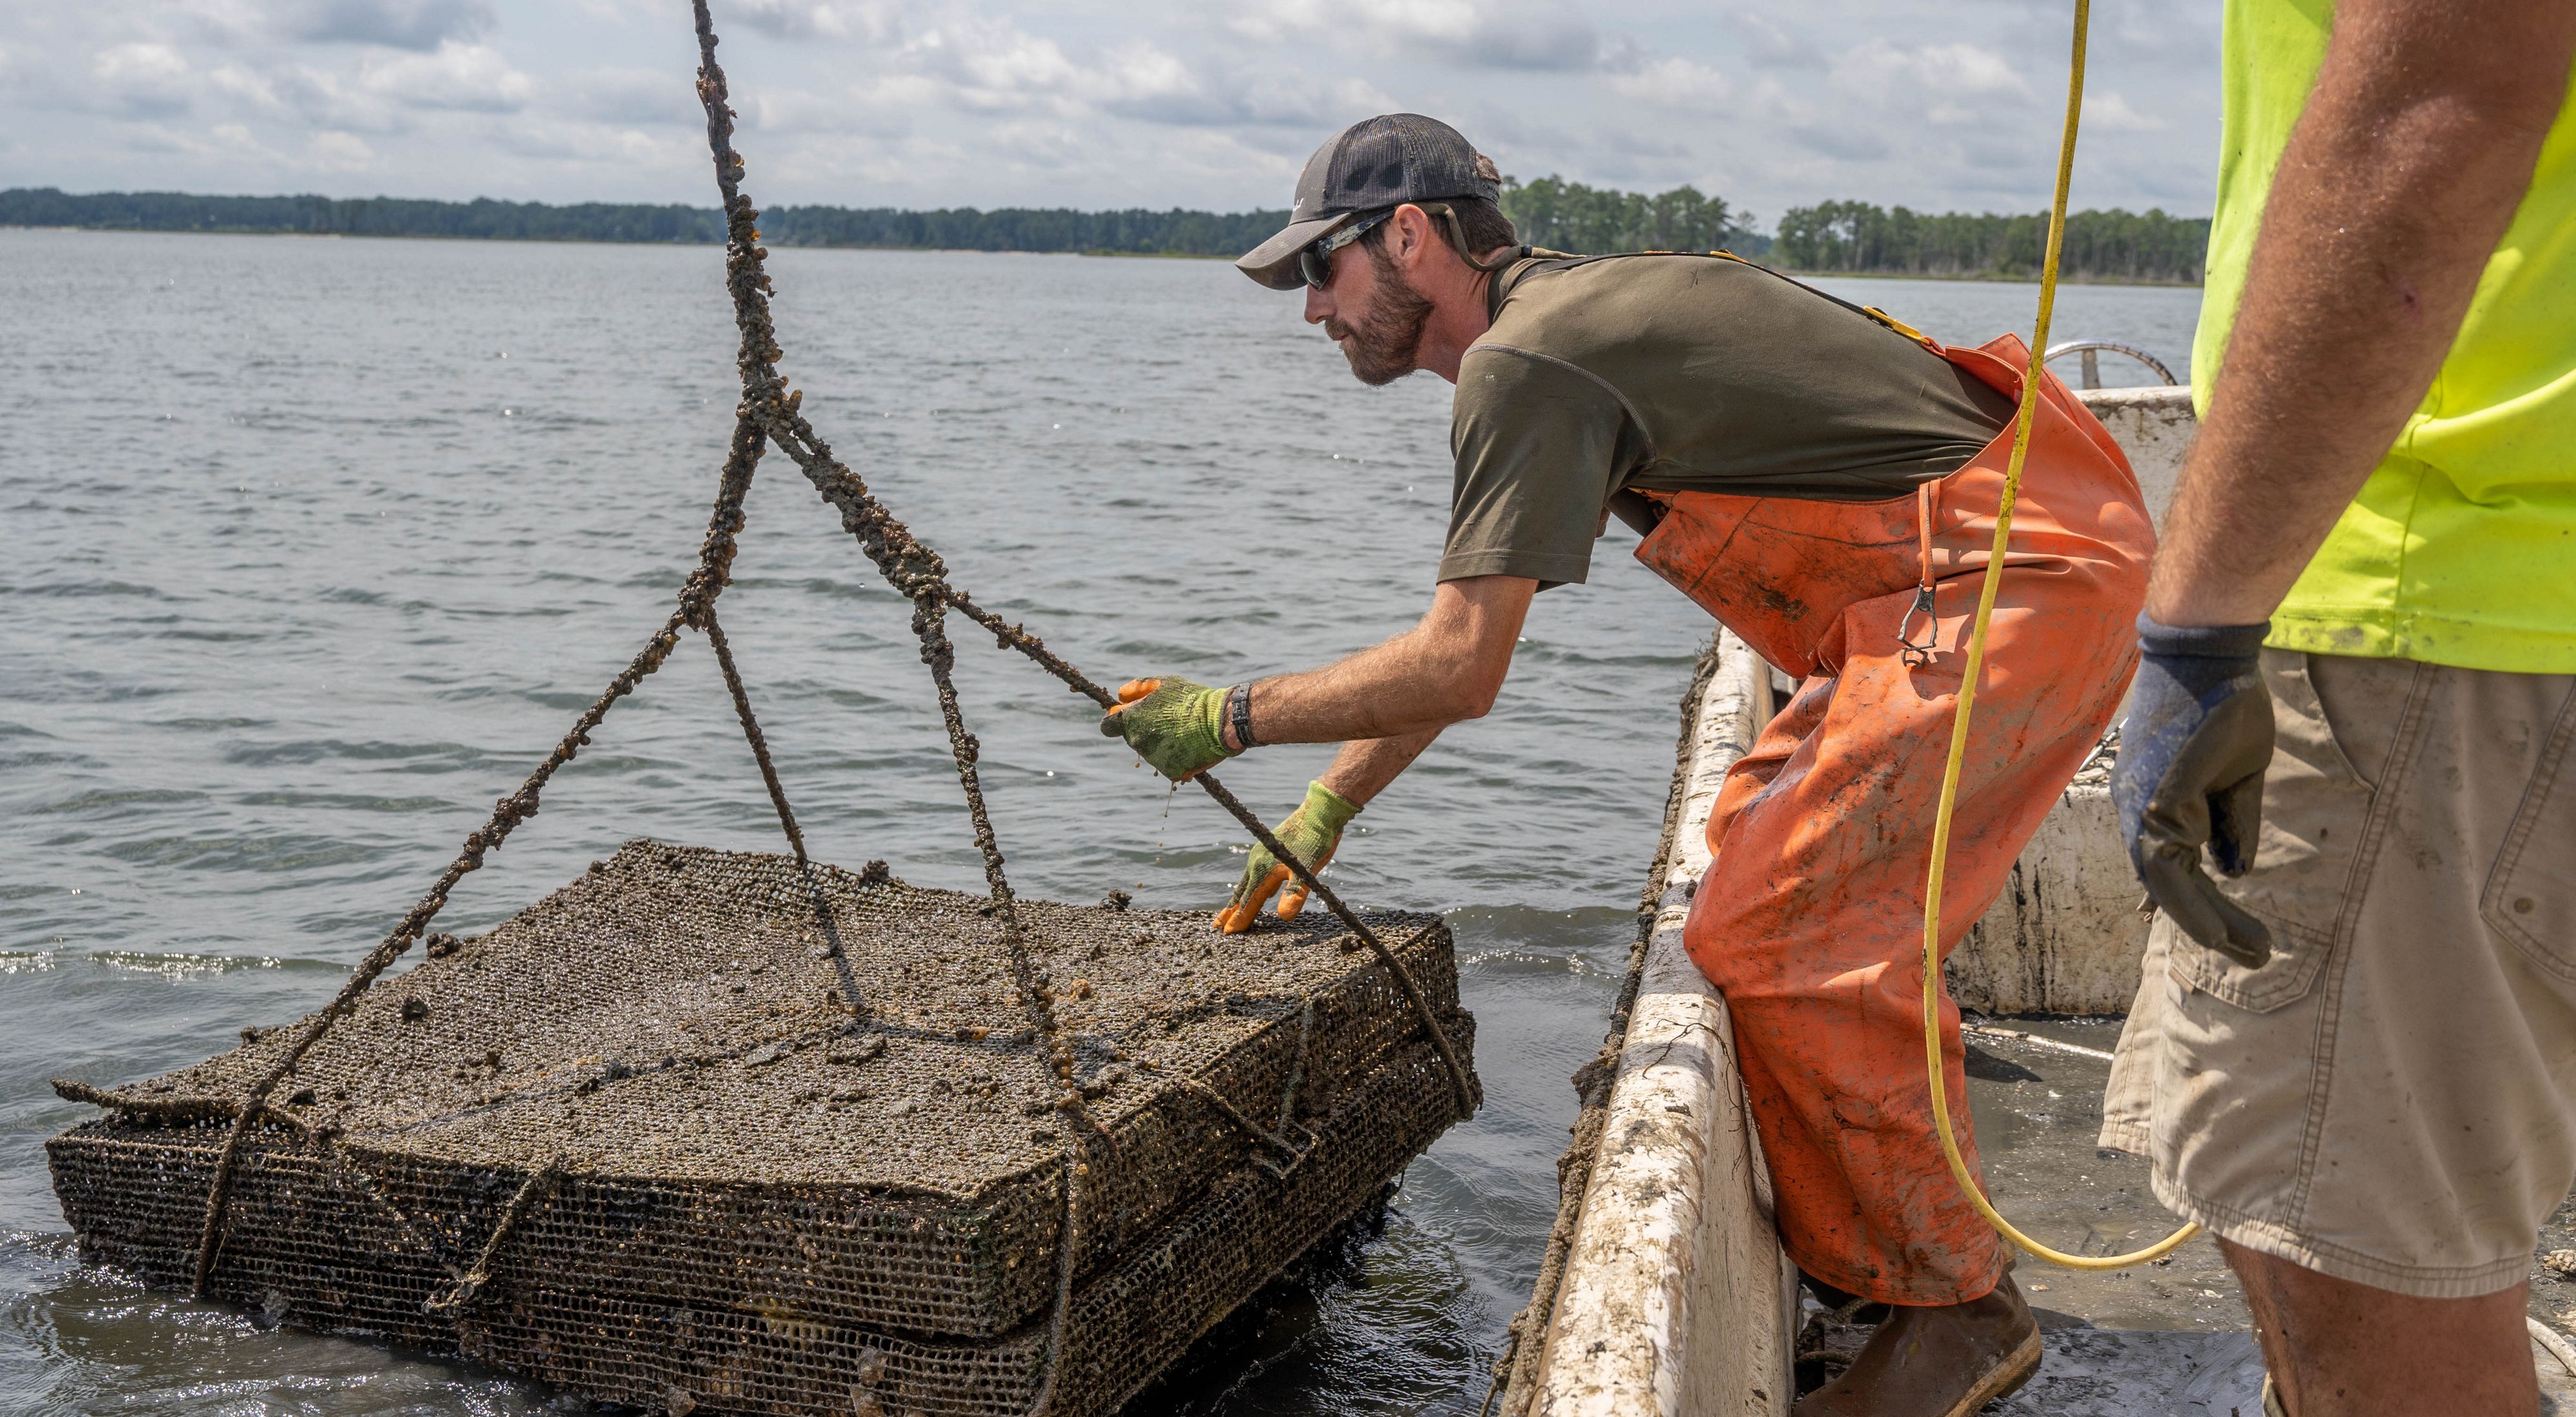 Two workers at Rappahannock Oyster Co. lift an oyster cage out of the water.